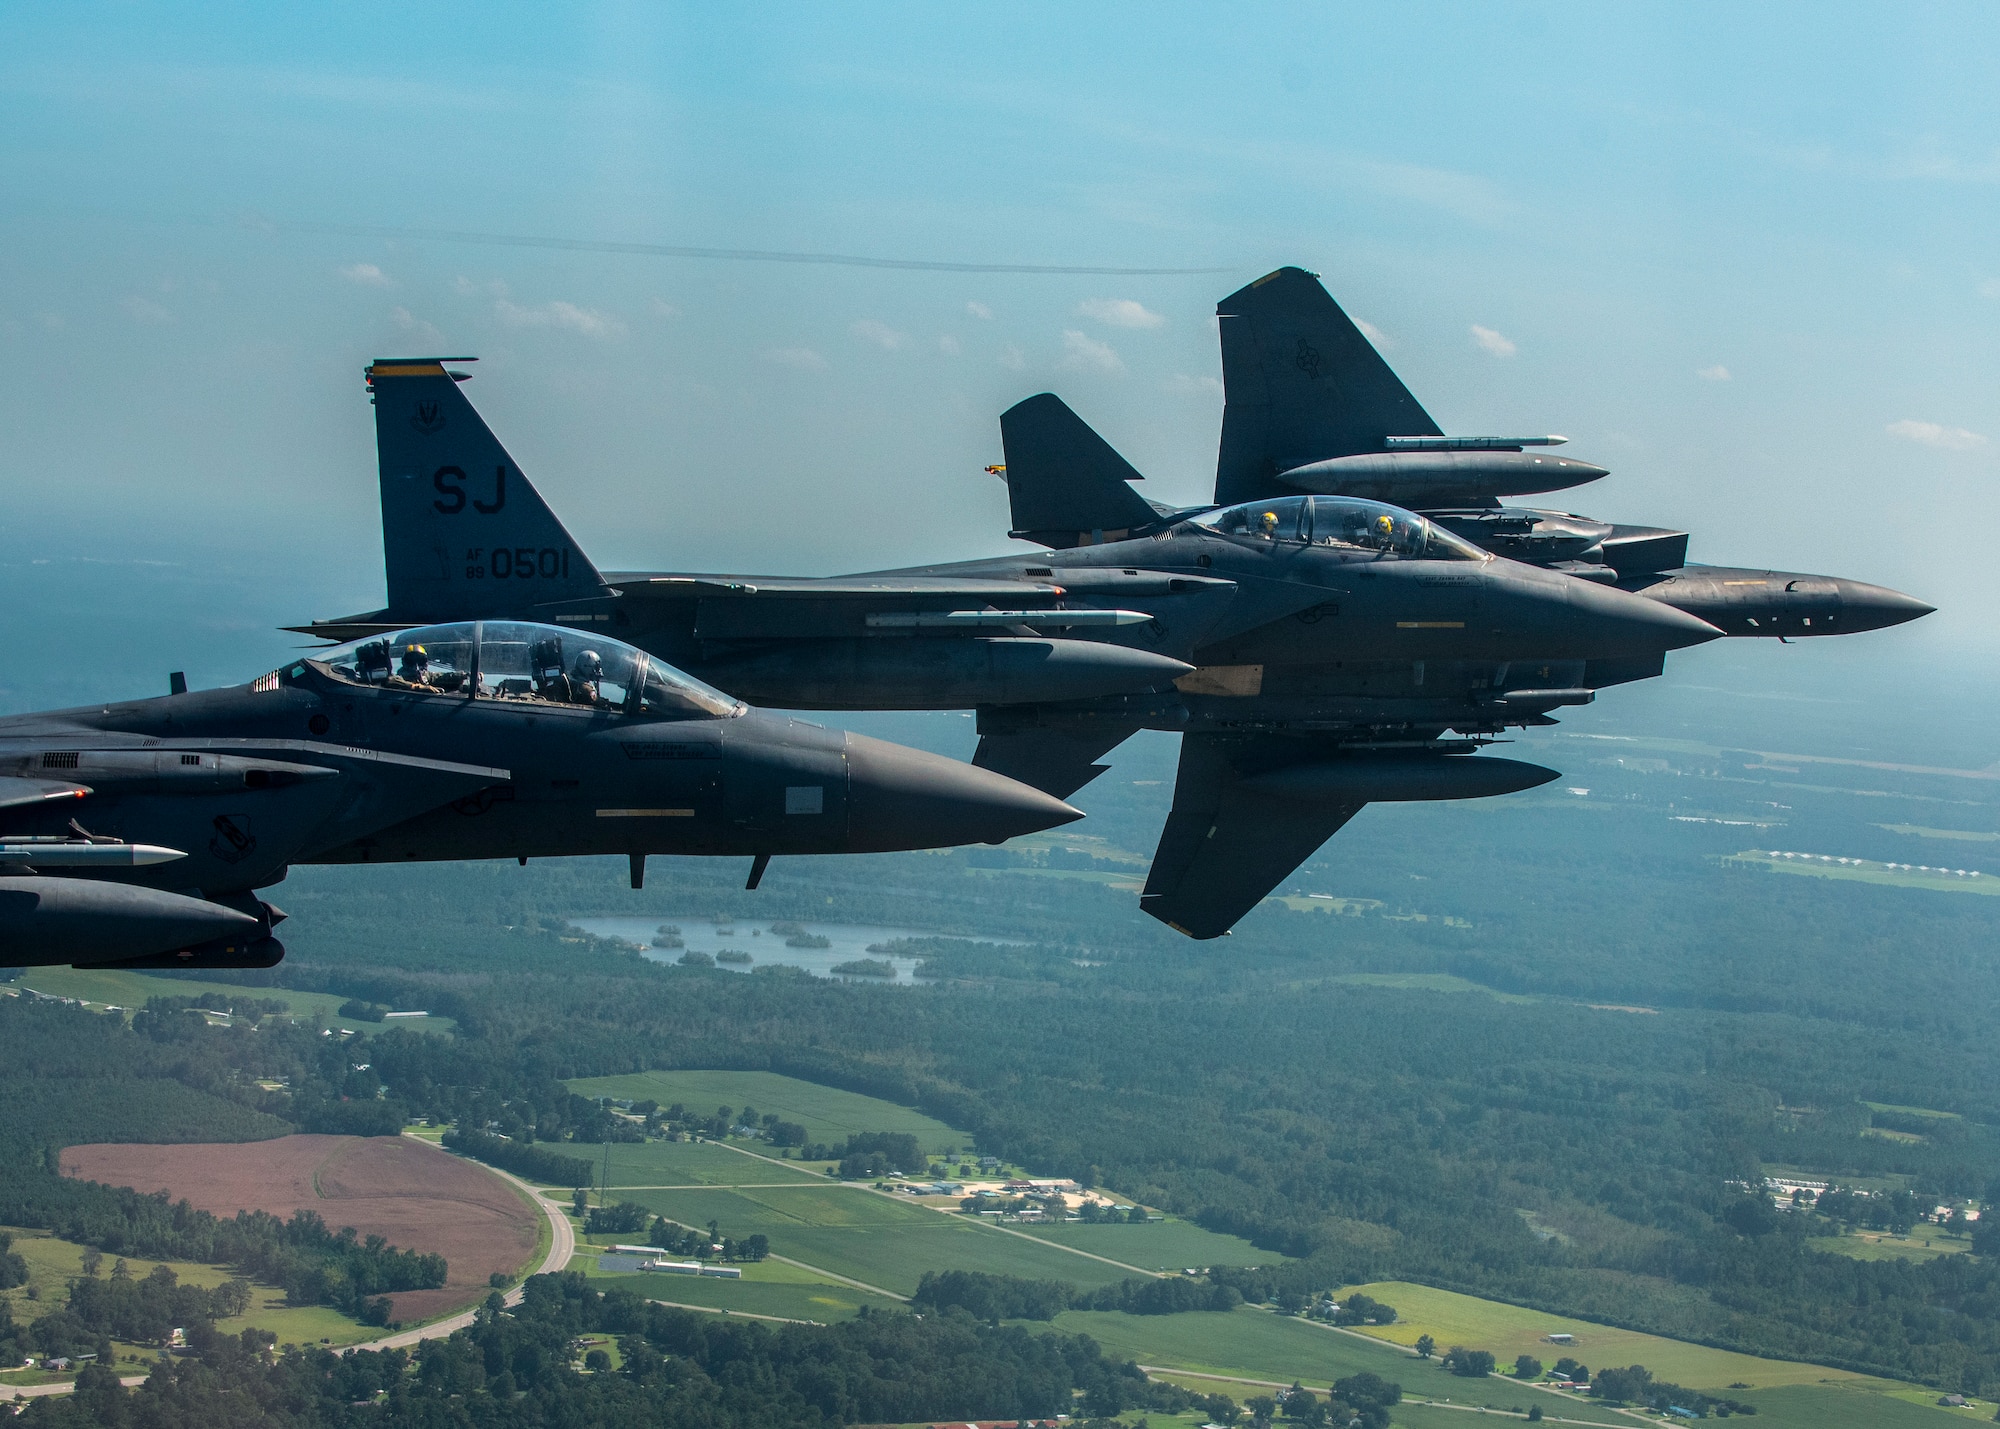 An F-15E Strike Eagles from the 336th Fighter Squadron at Seymour Johnson Air Force Base breaks out of formation as the fly in the sky over North Carolina